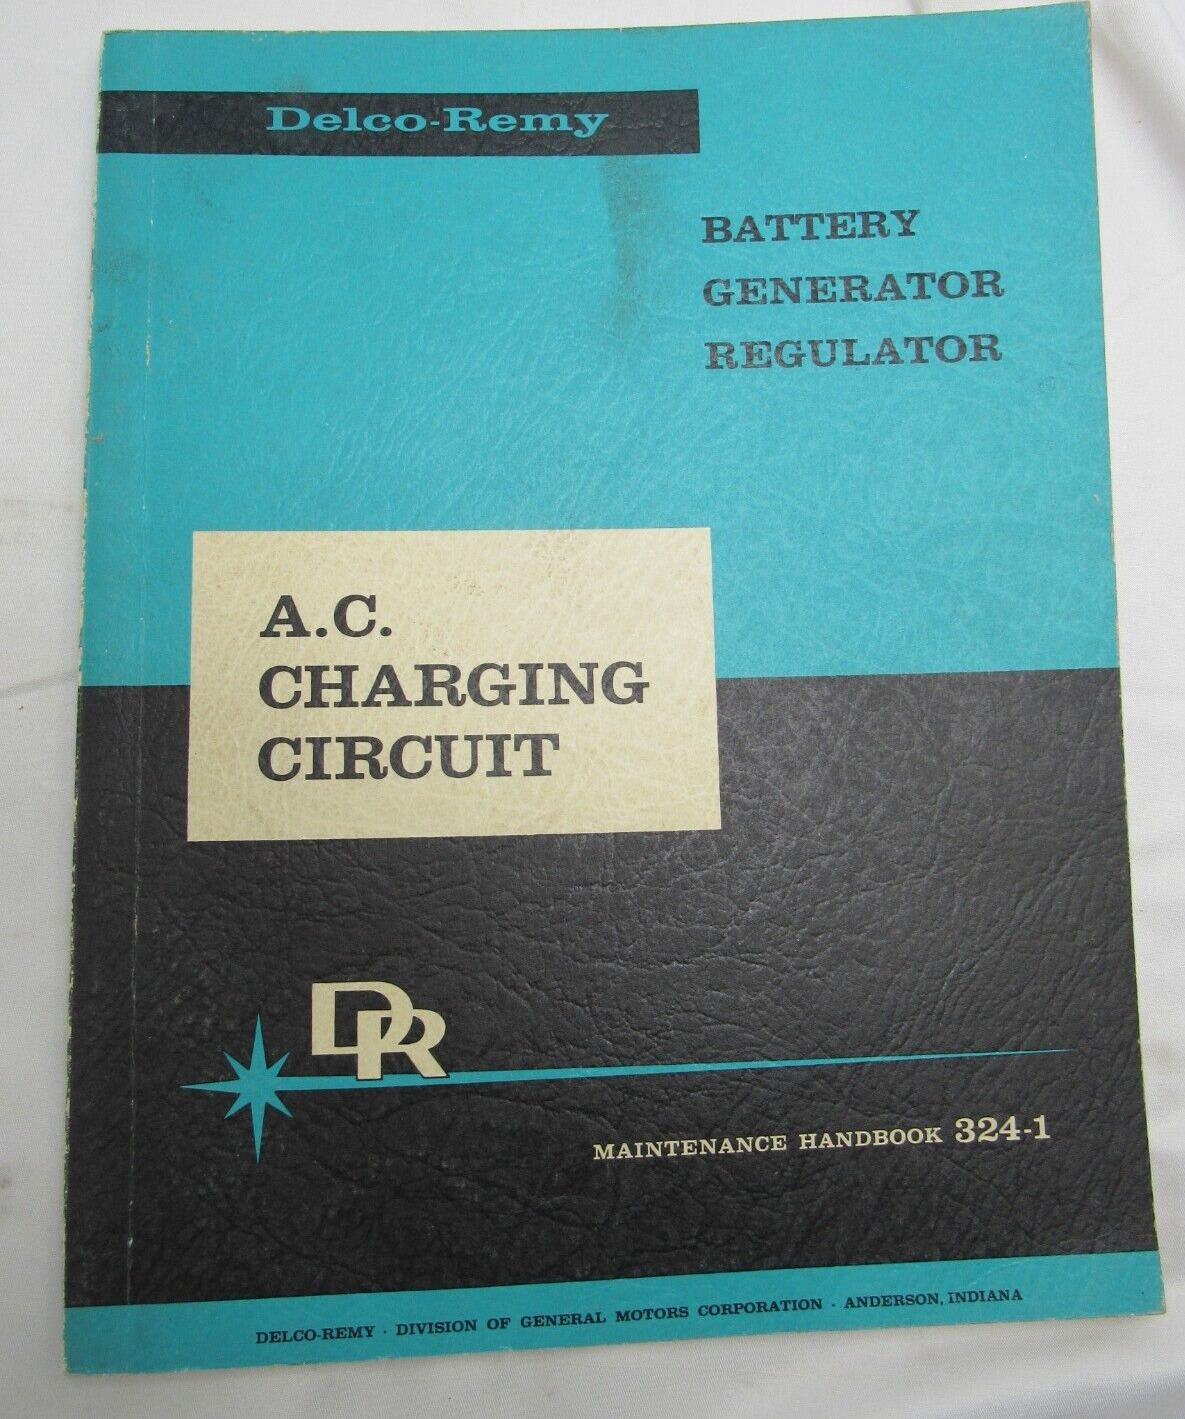 Battery Generator Regulator AC Charging Circuit Book by Delco-Remy